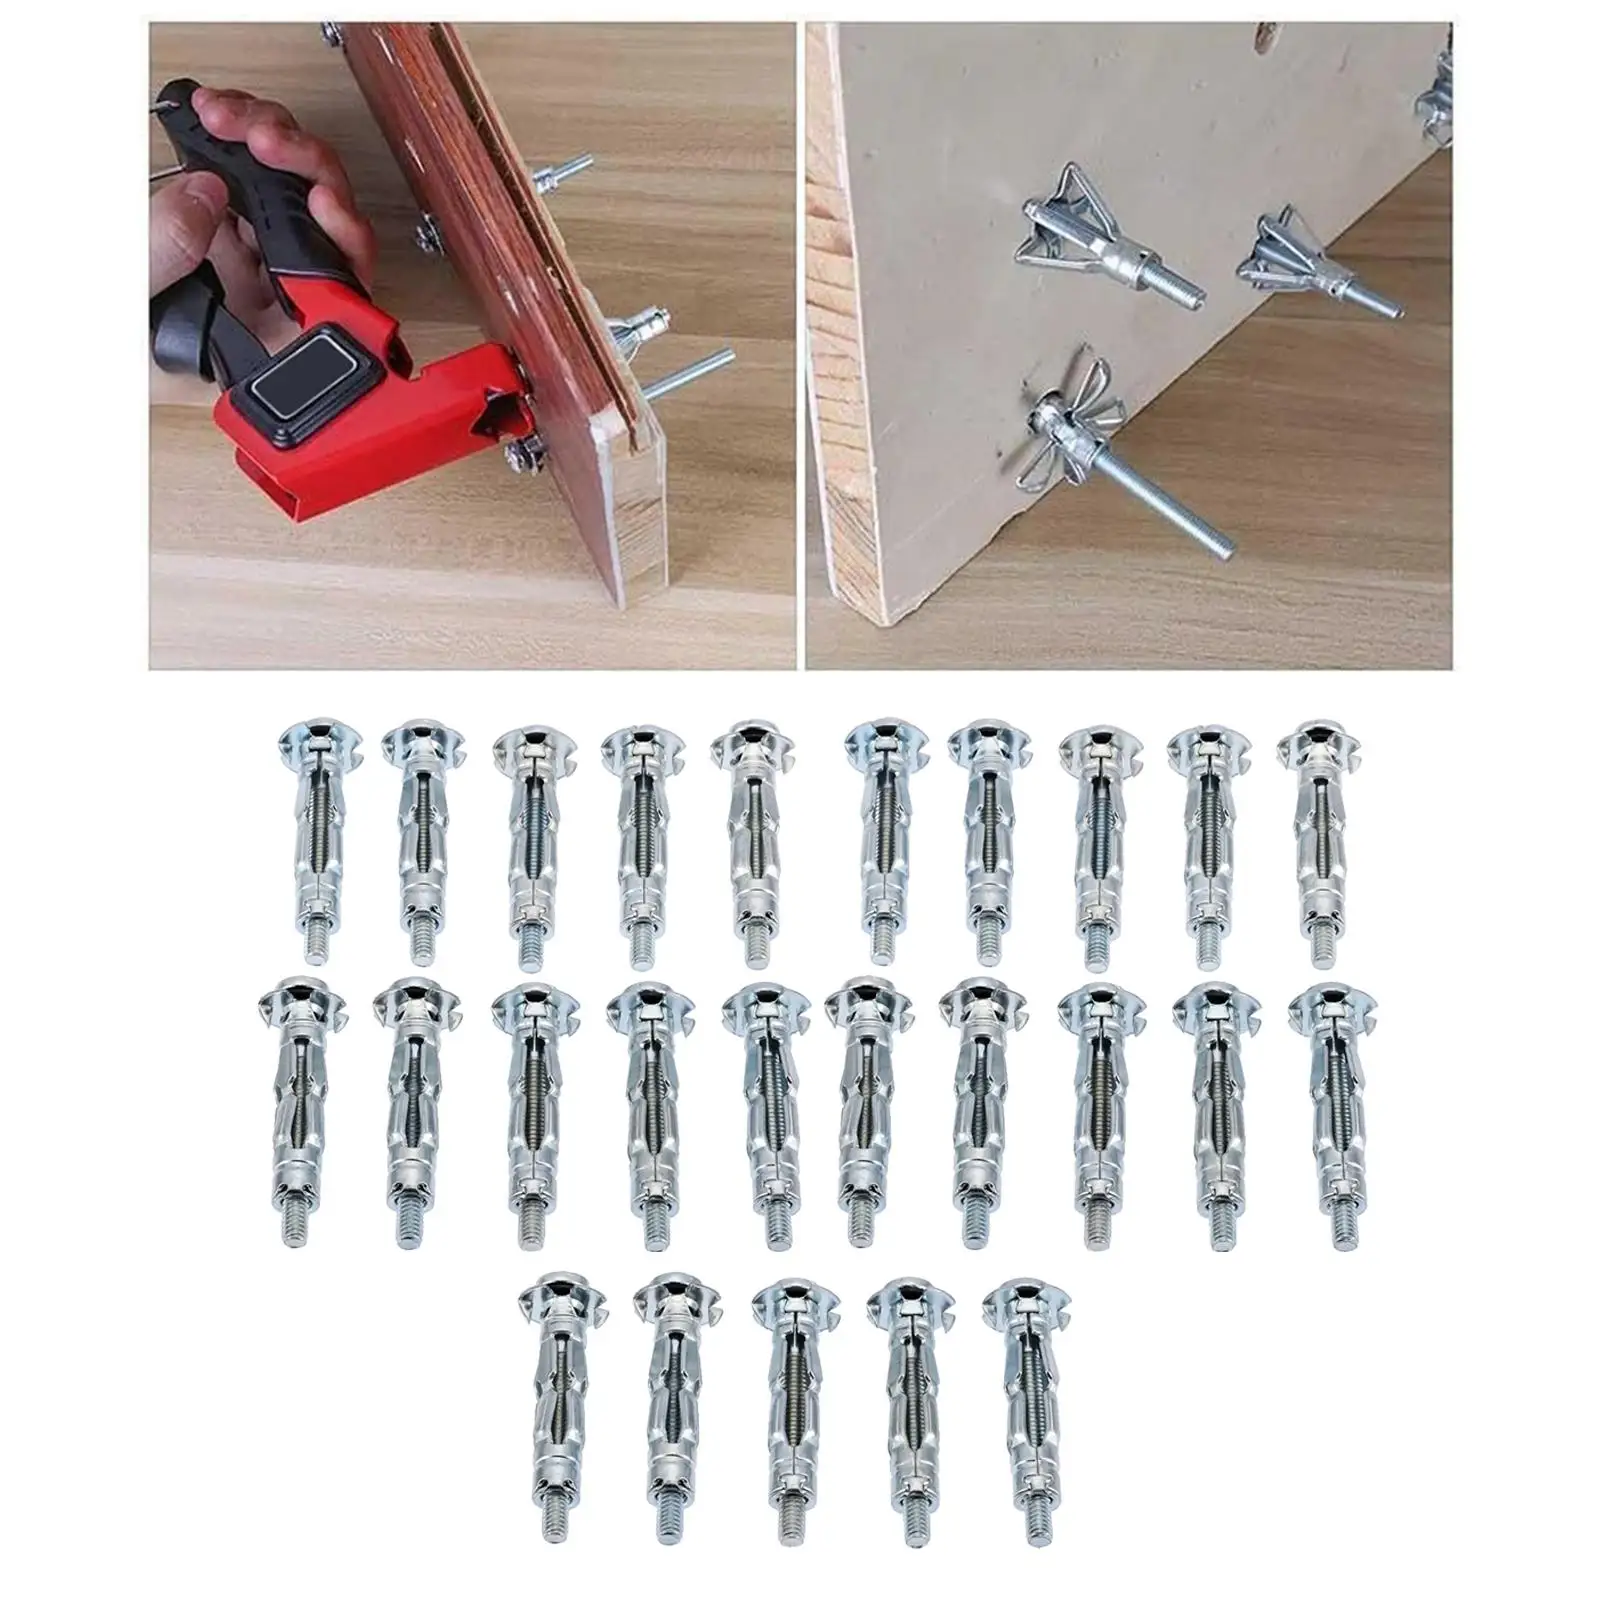 25 Pieces Carbon Steel Hollow Wall Anchors Metal Plasterboard Cavity Wall Fixings Anchors Plugs Plaster Anchors for Plaster Tile